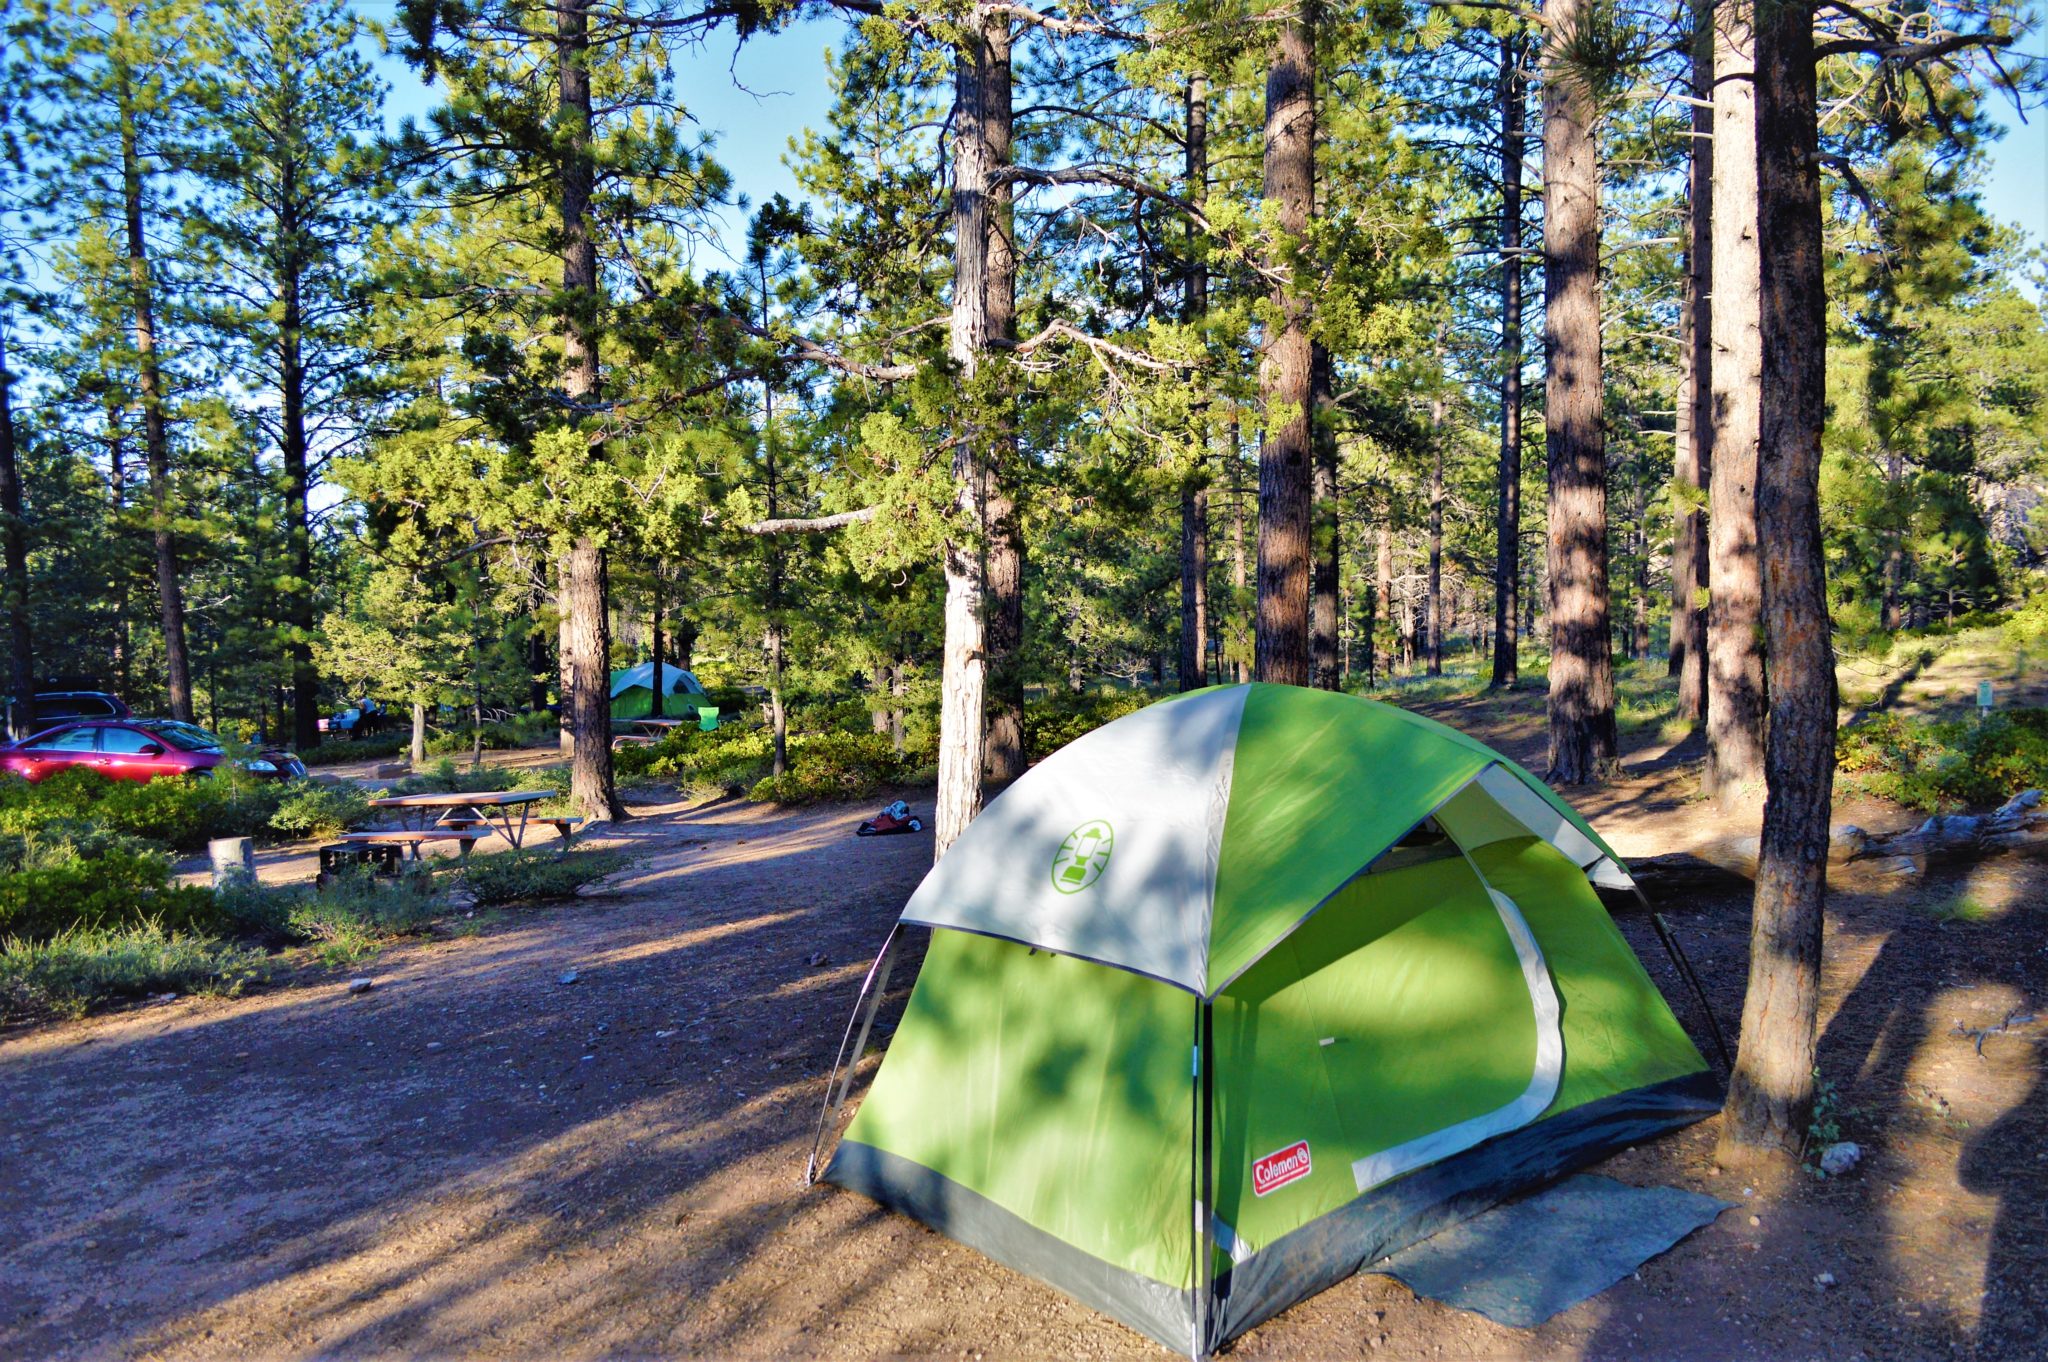 bryce canyon camping reservation 2020